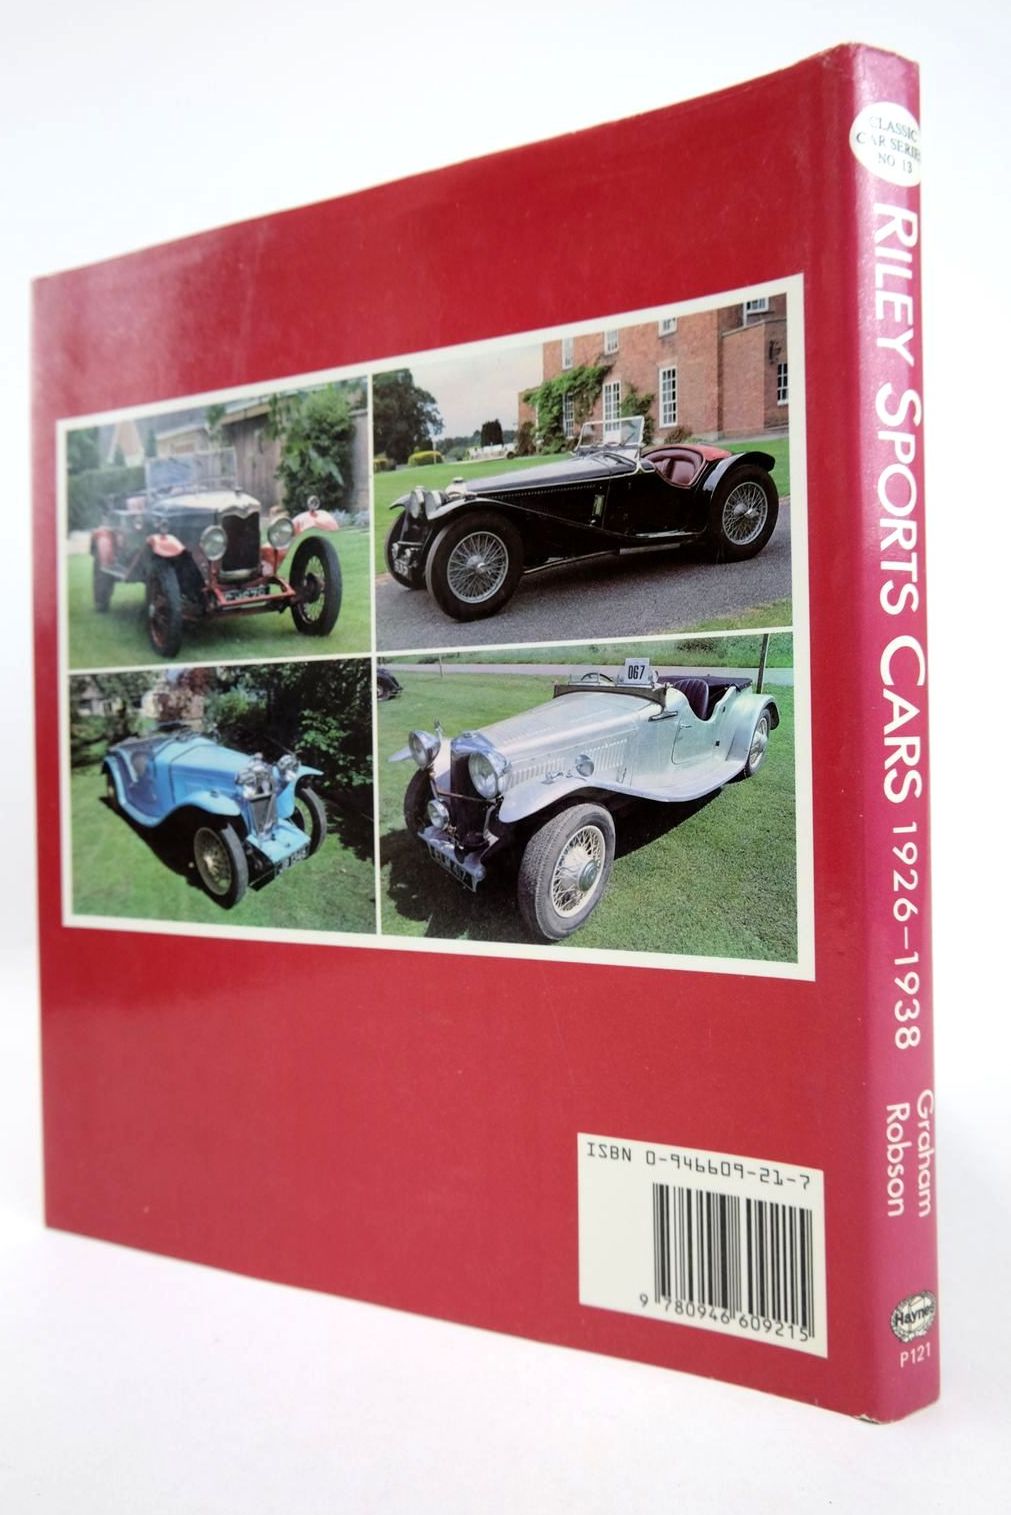 Photo of RILEY SPORTS CARS 1926-1938 written by Robson, Graham published by The Oxford Illustrated Press, Haynes (STOCK CODE: 2132781)  for sale by Stella & Rose's Books